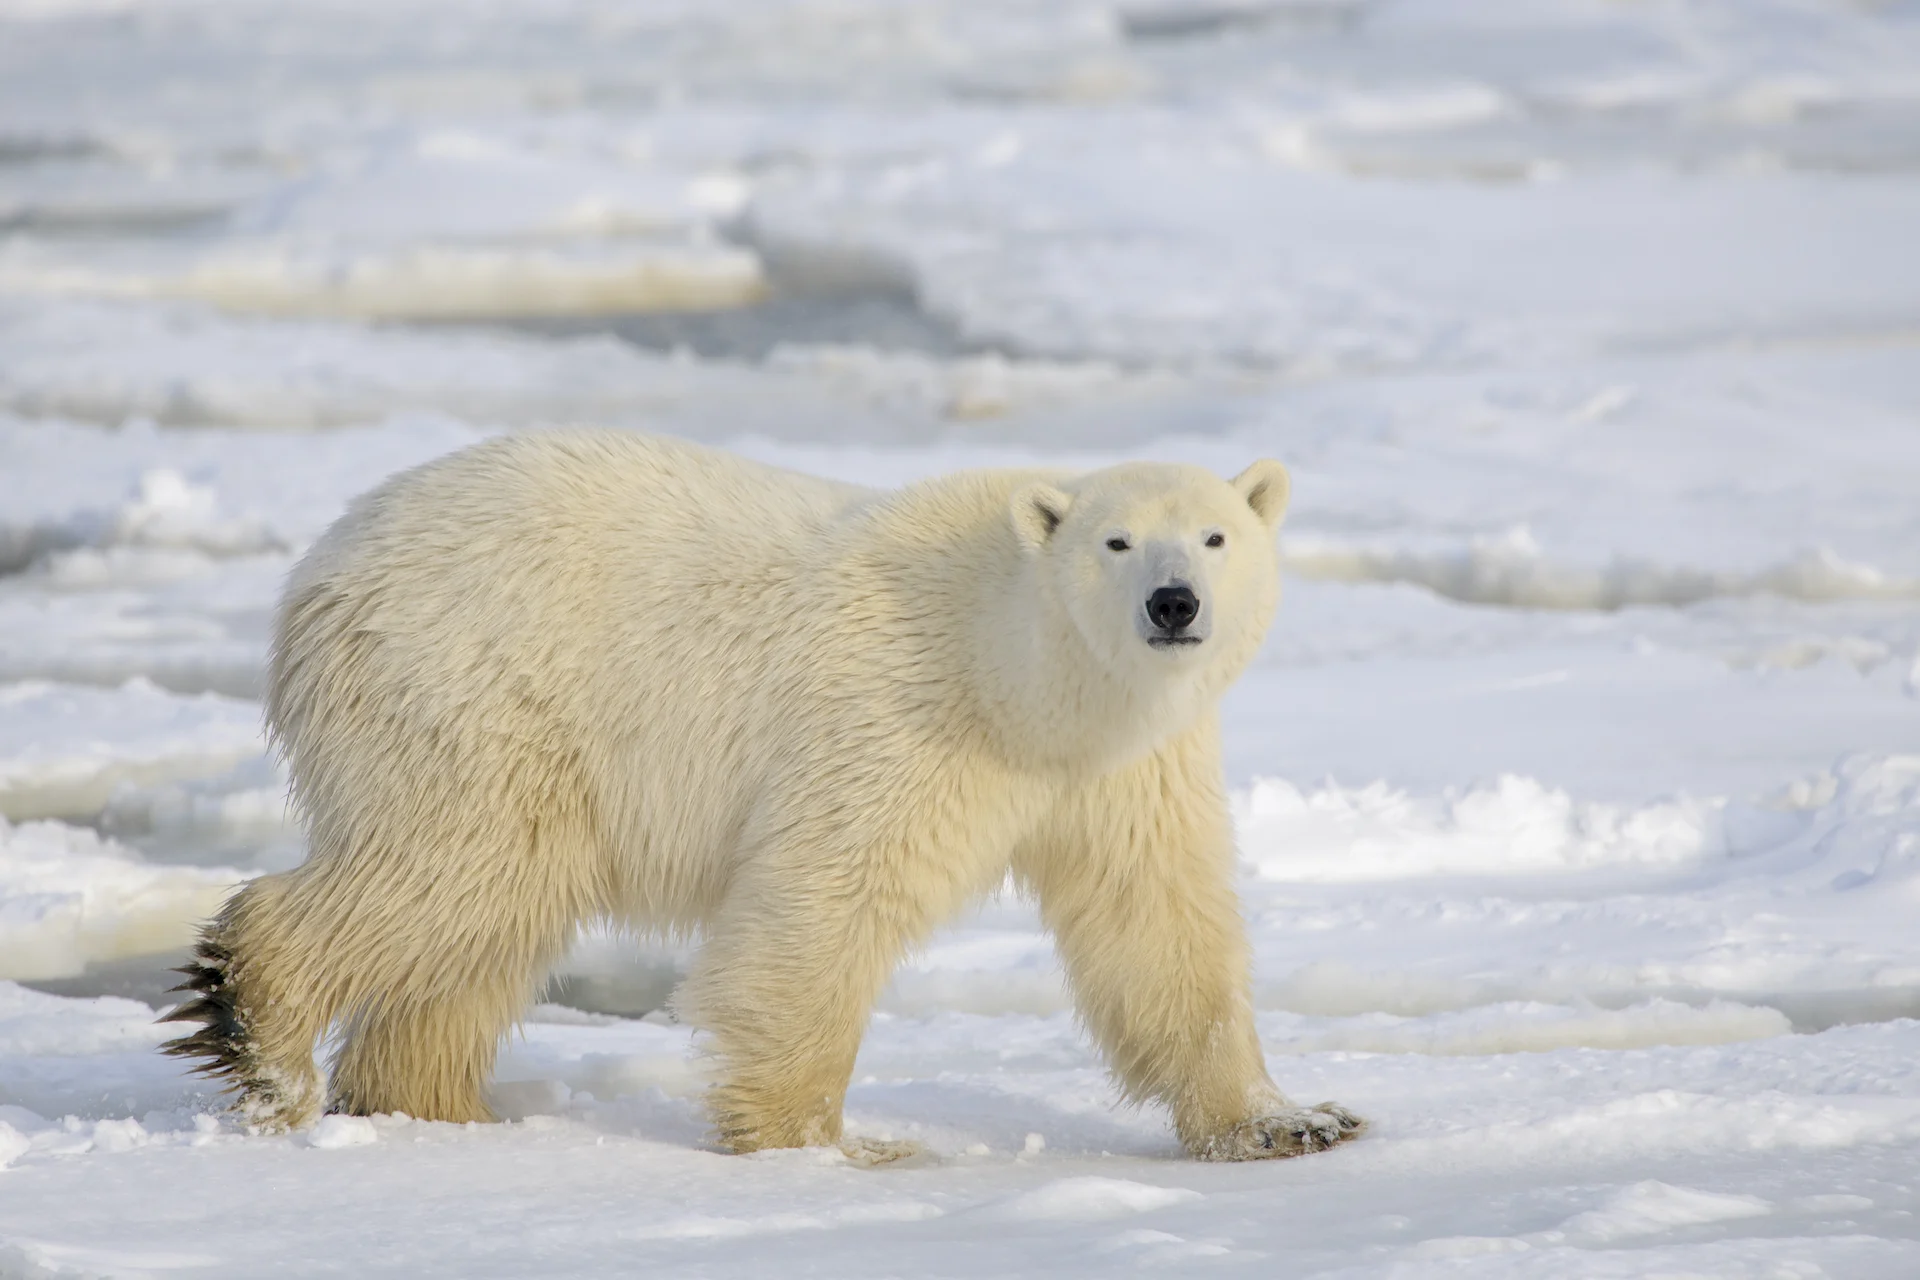 First polar bear to die of bird flu – what are the implications?